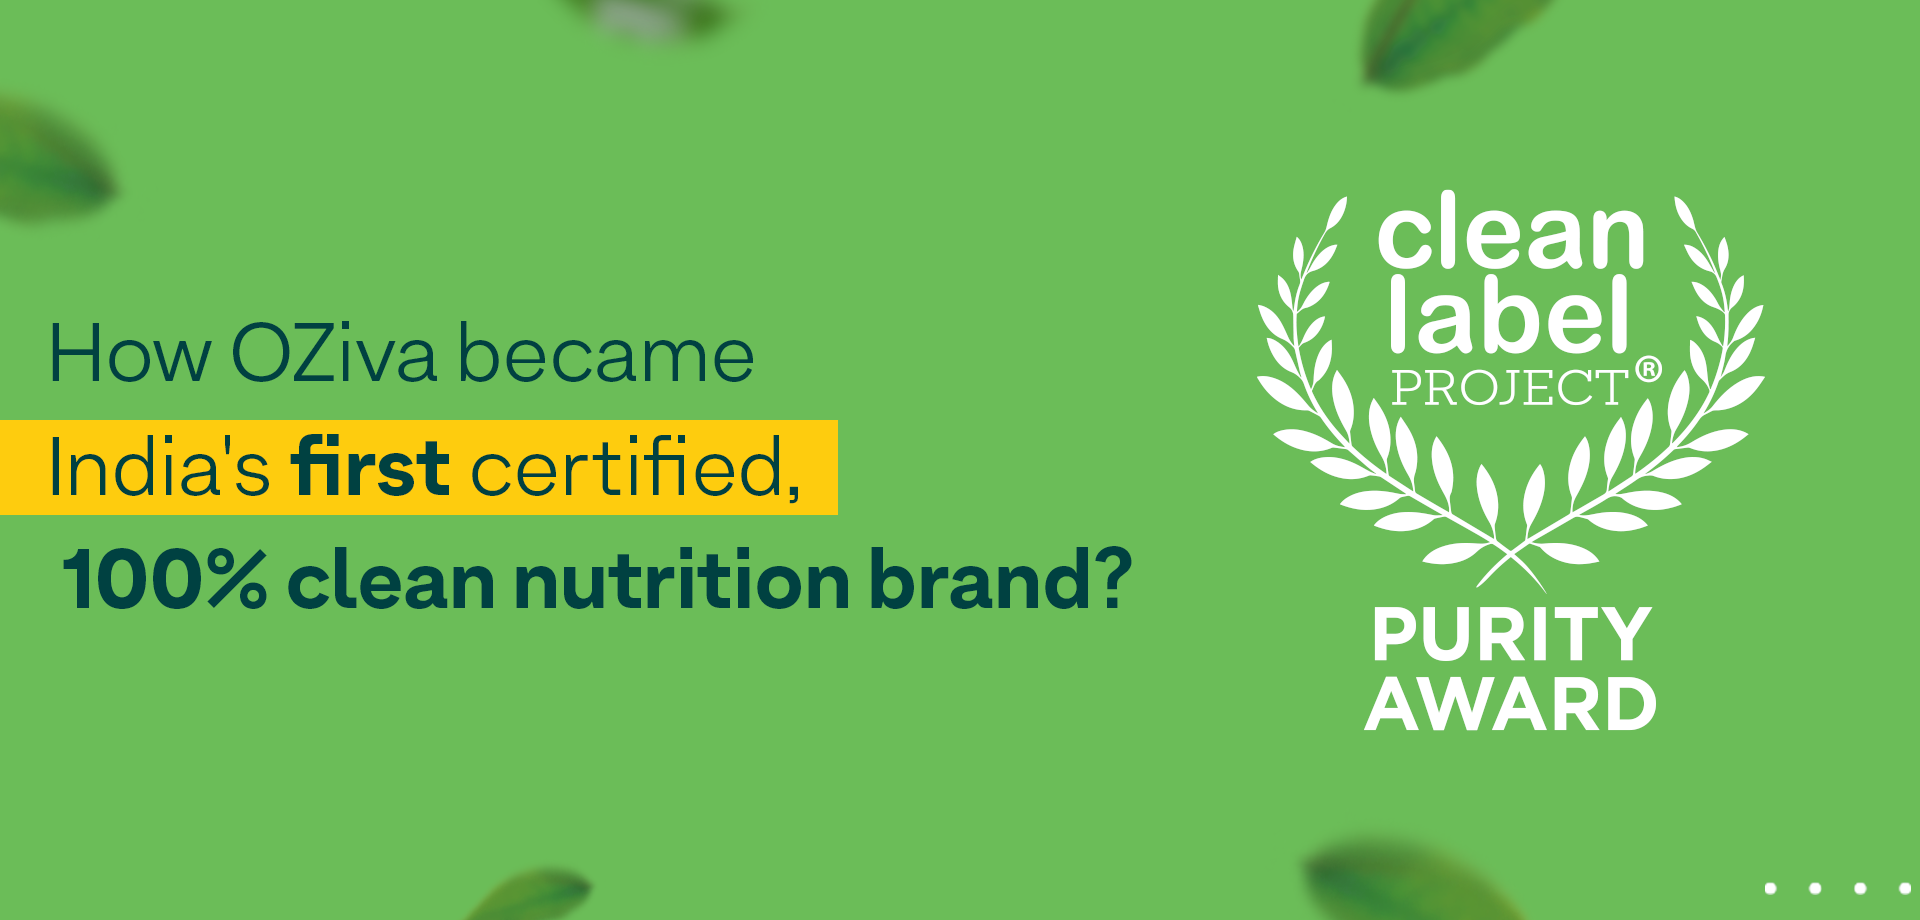 Nutrition Brand In India